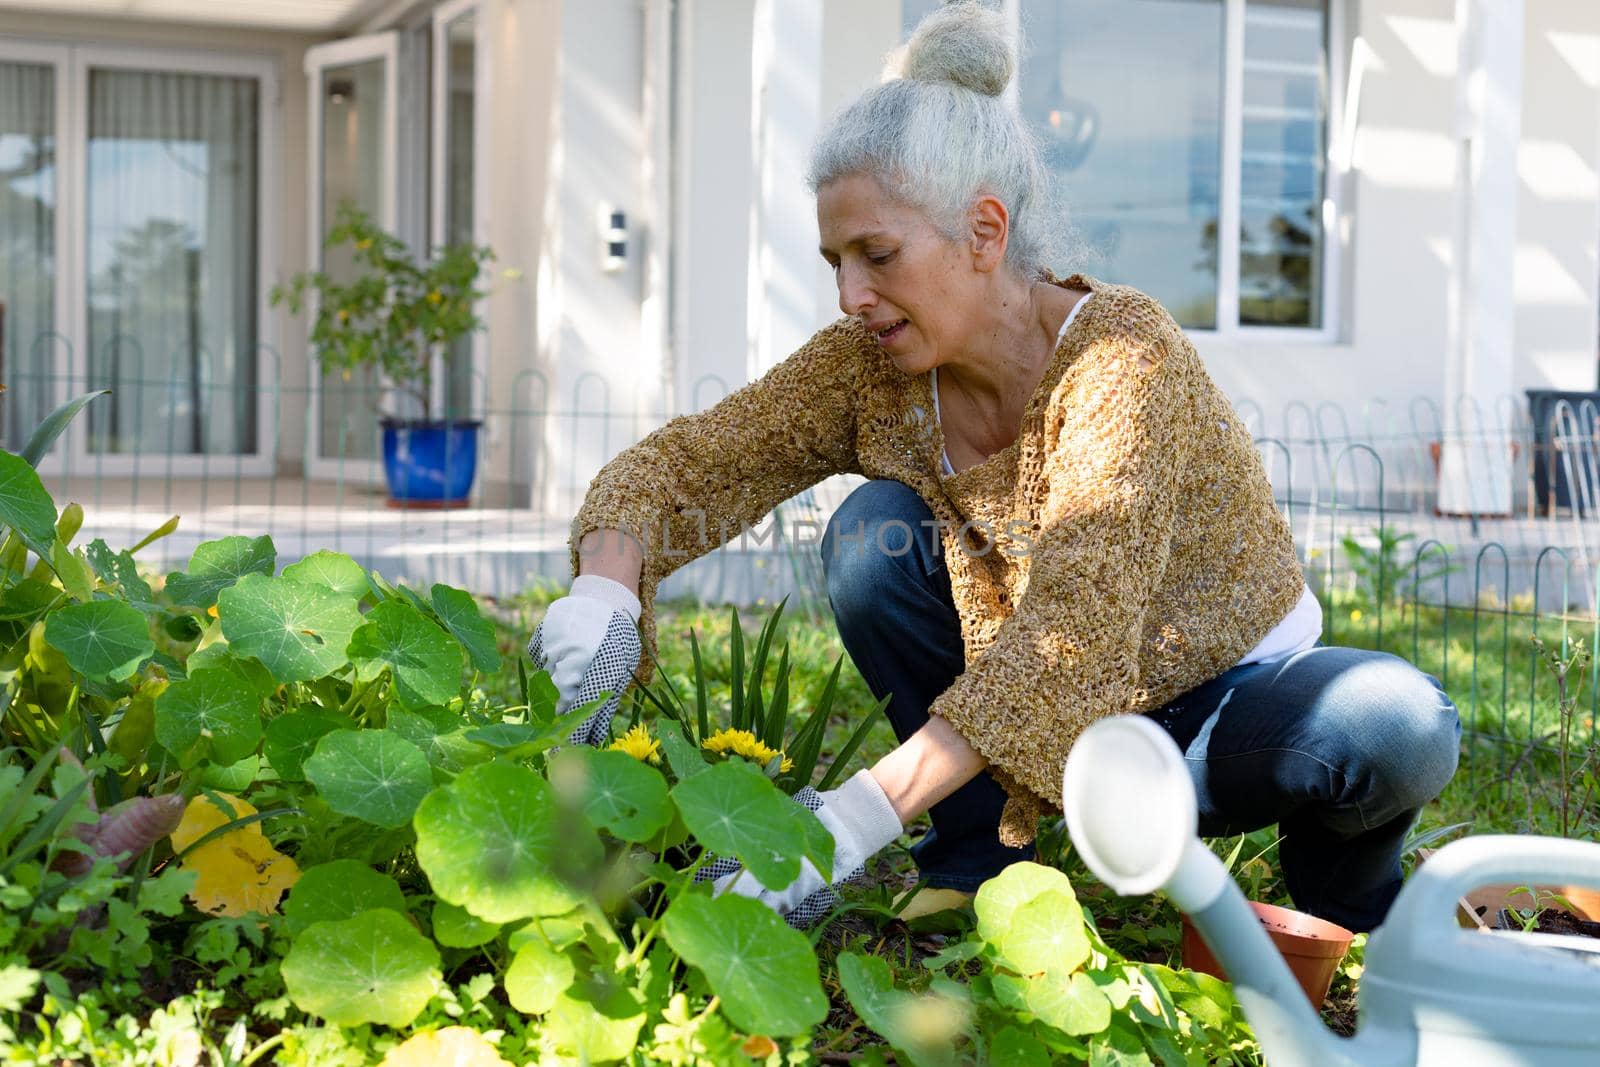 Caucasian senior woman wearing gloves and gardening. active and healthy retirement lifestyle at home and garden.